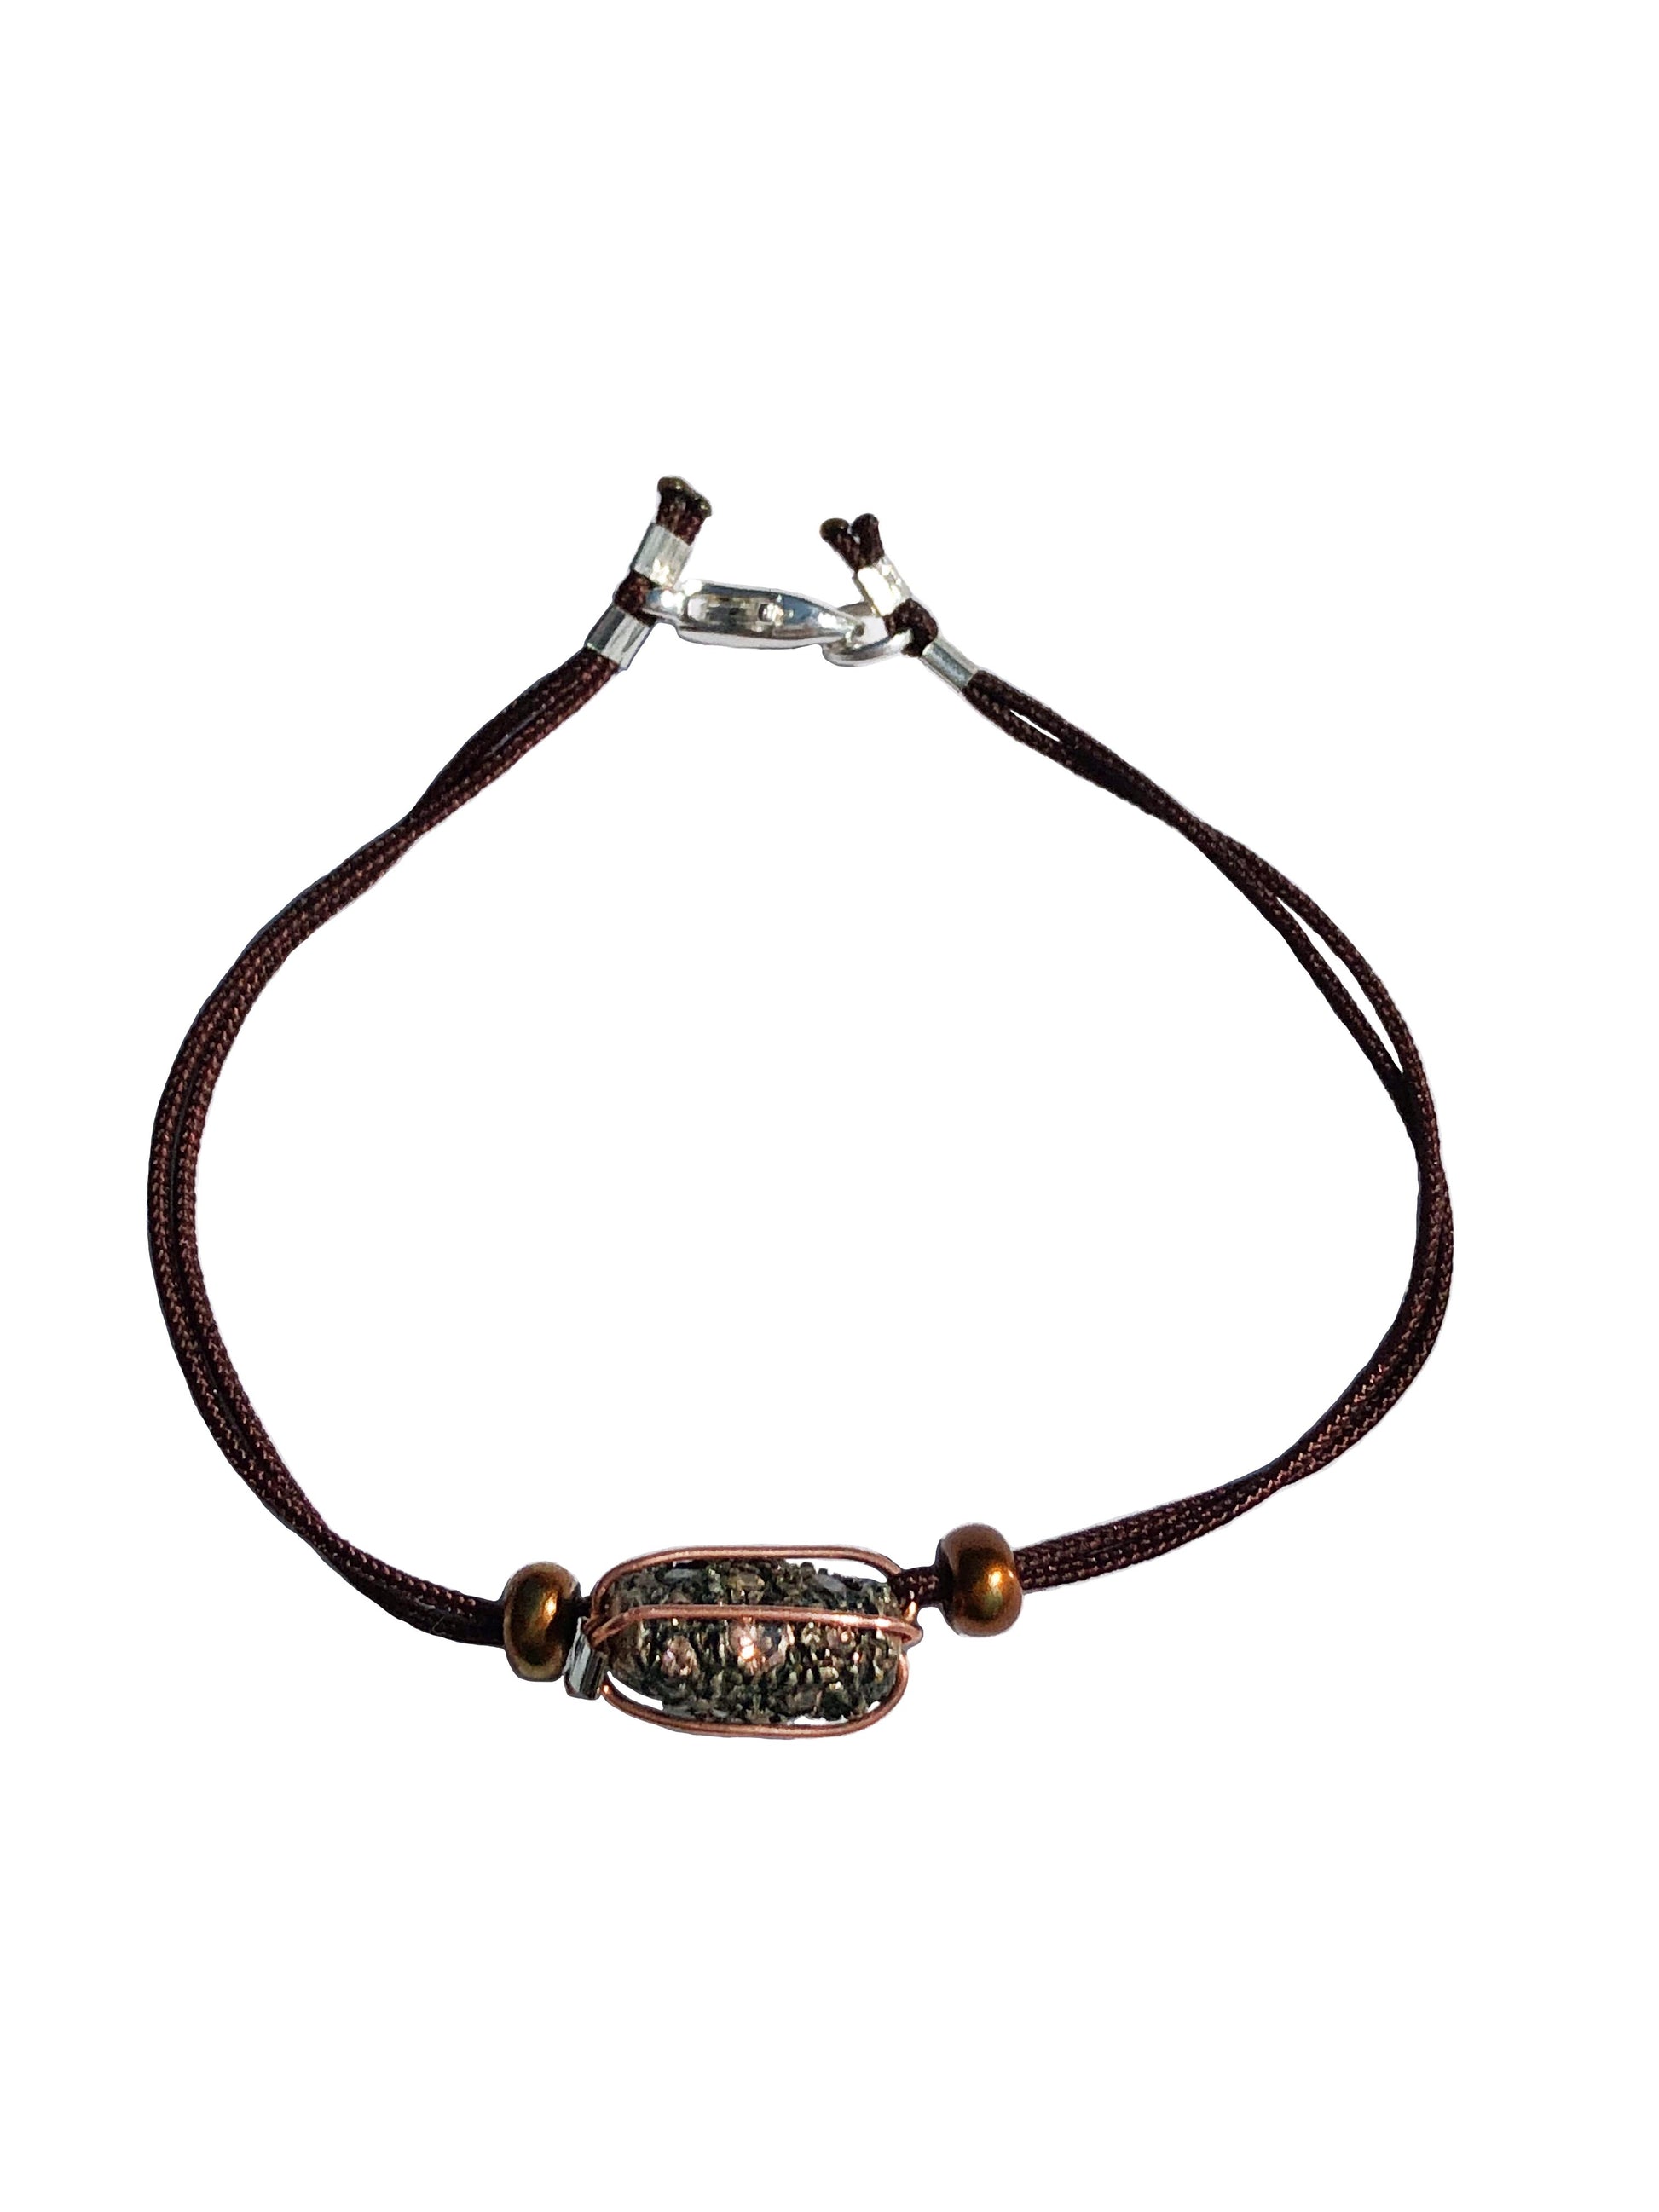 Handcrafted copper wire wrapped zirconium stone bracelet with two bronze beads.